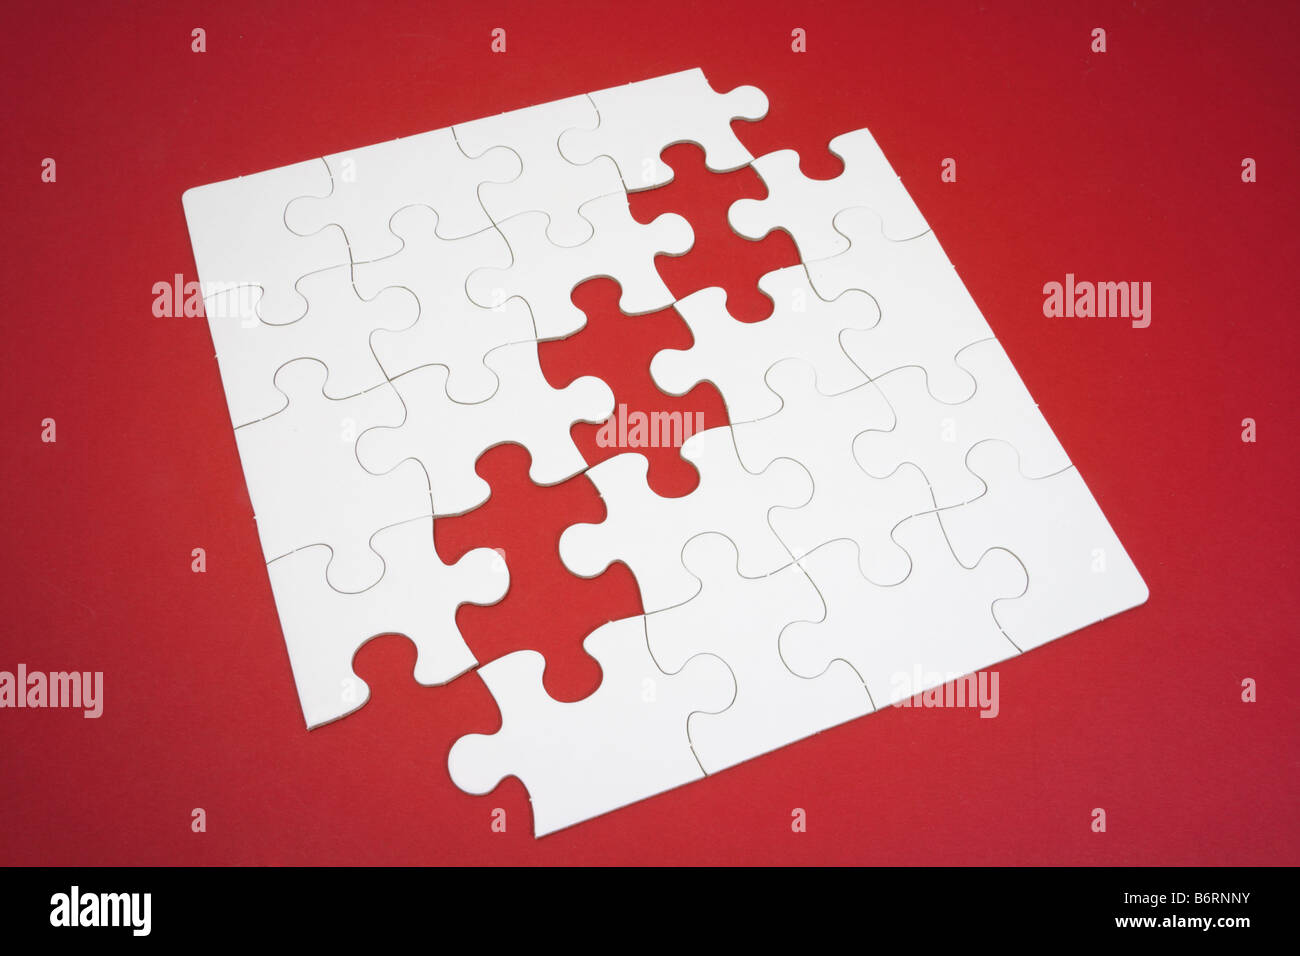 Jigsaw Puzzle with Missing Pieces Stock Photo